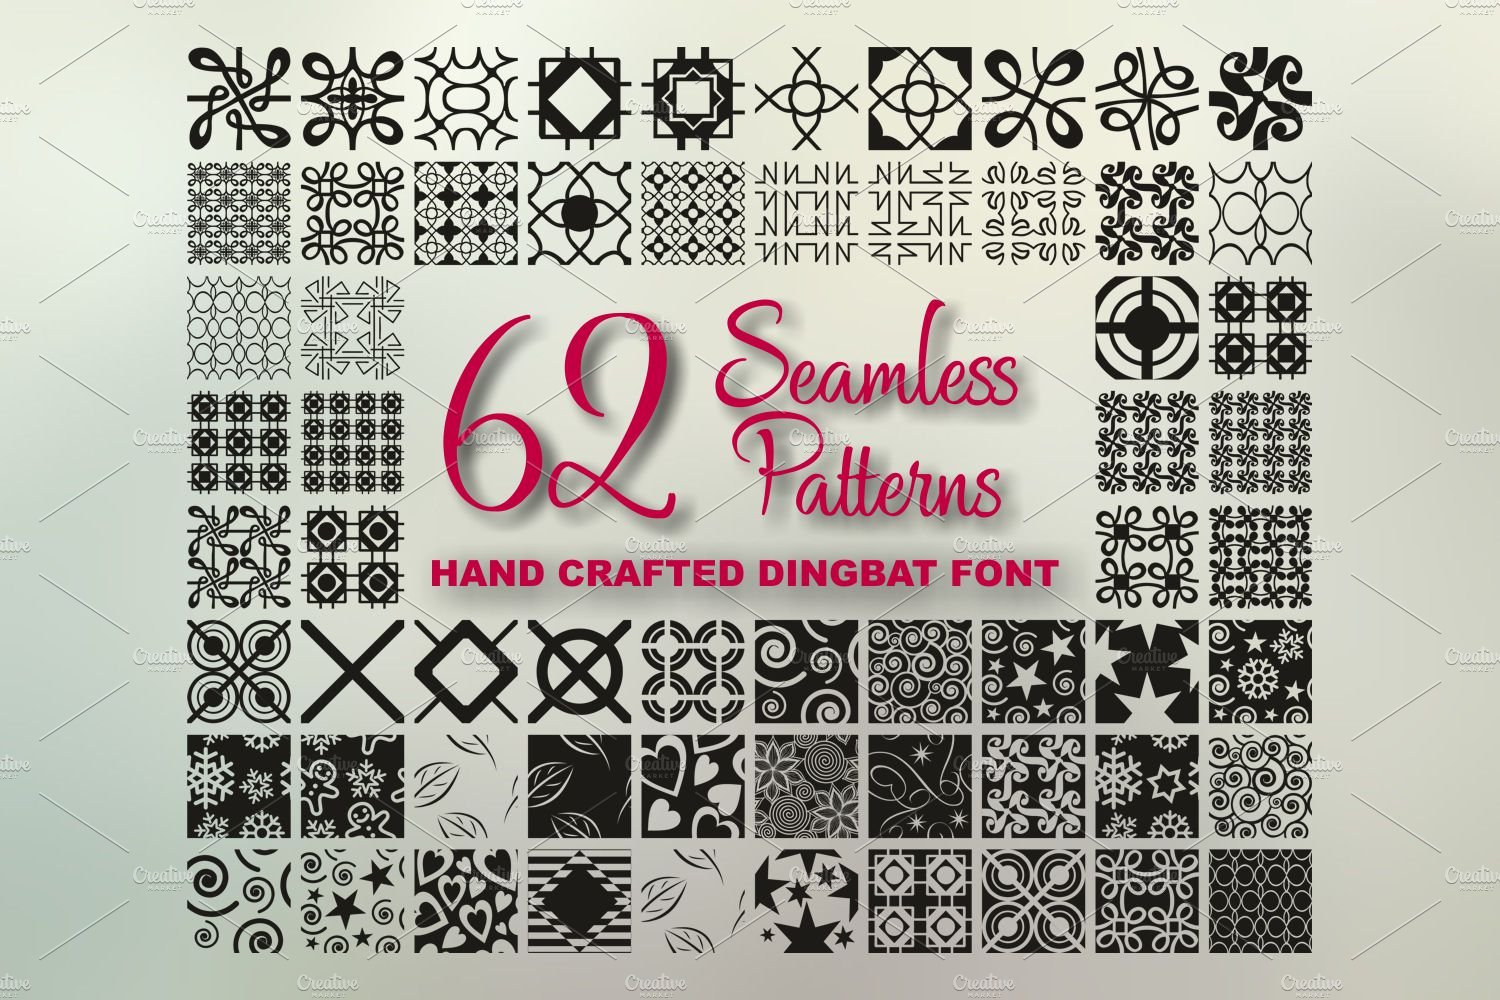 Seamless Patterns cover image.